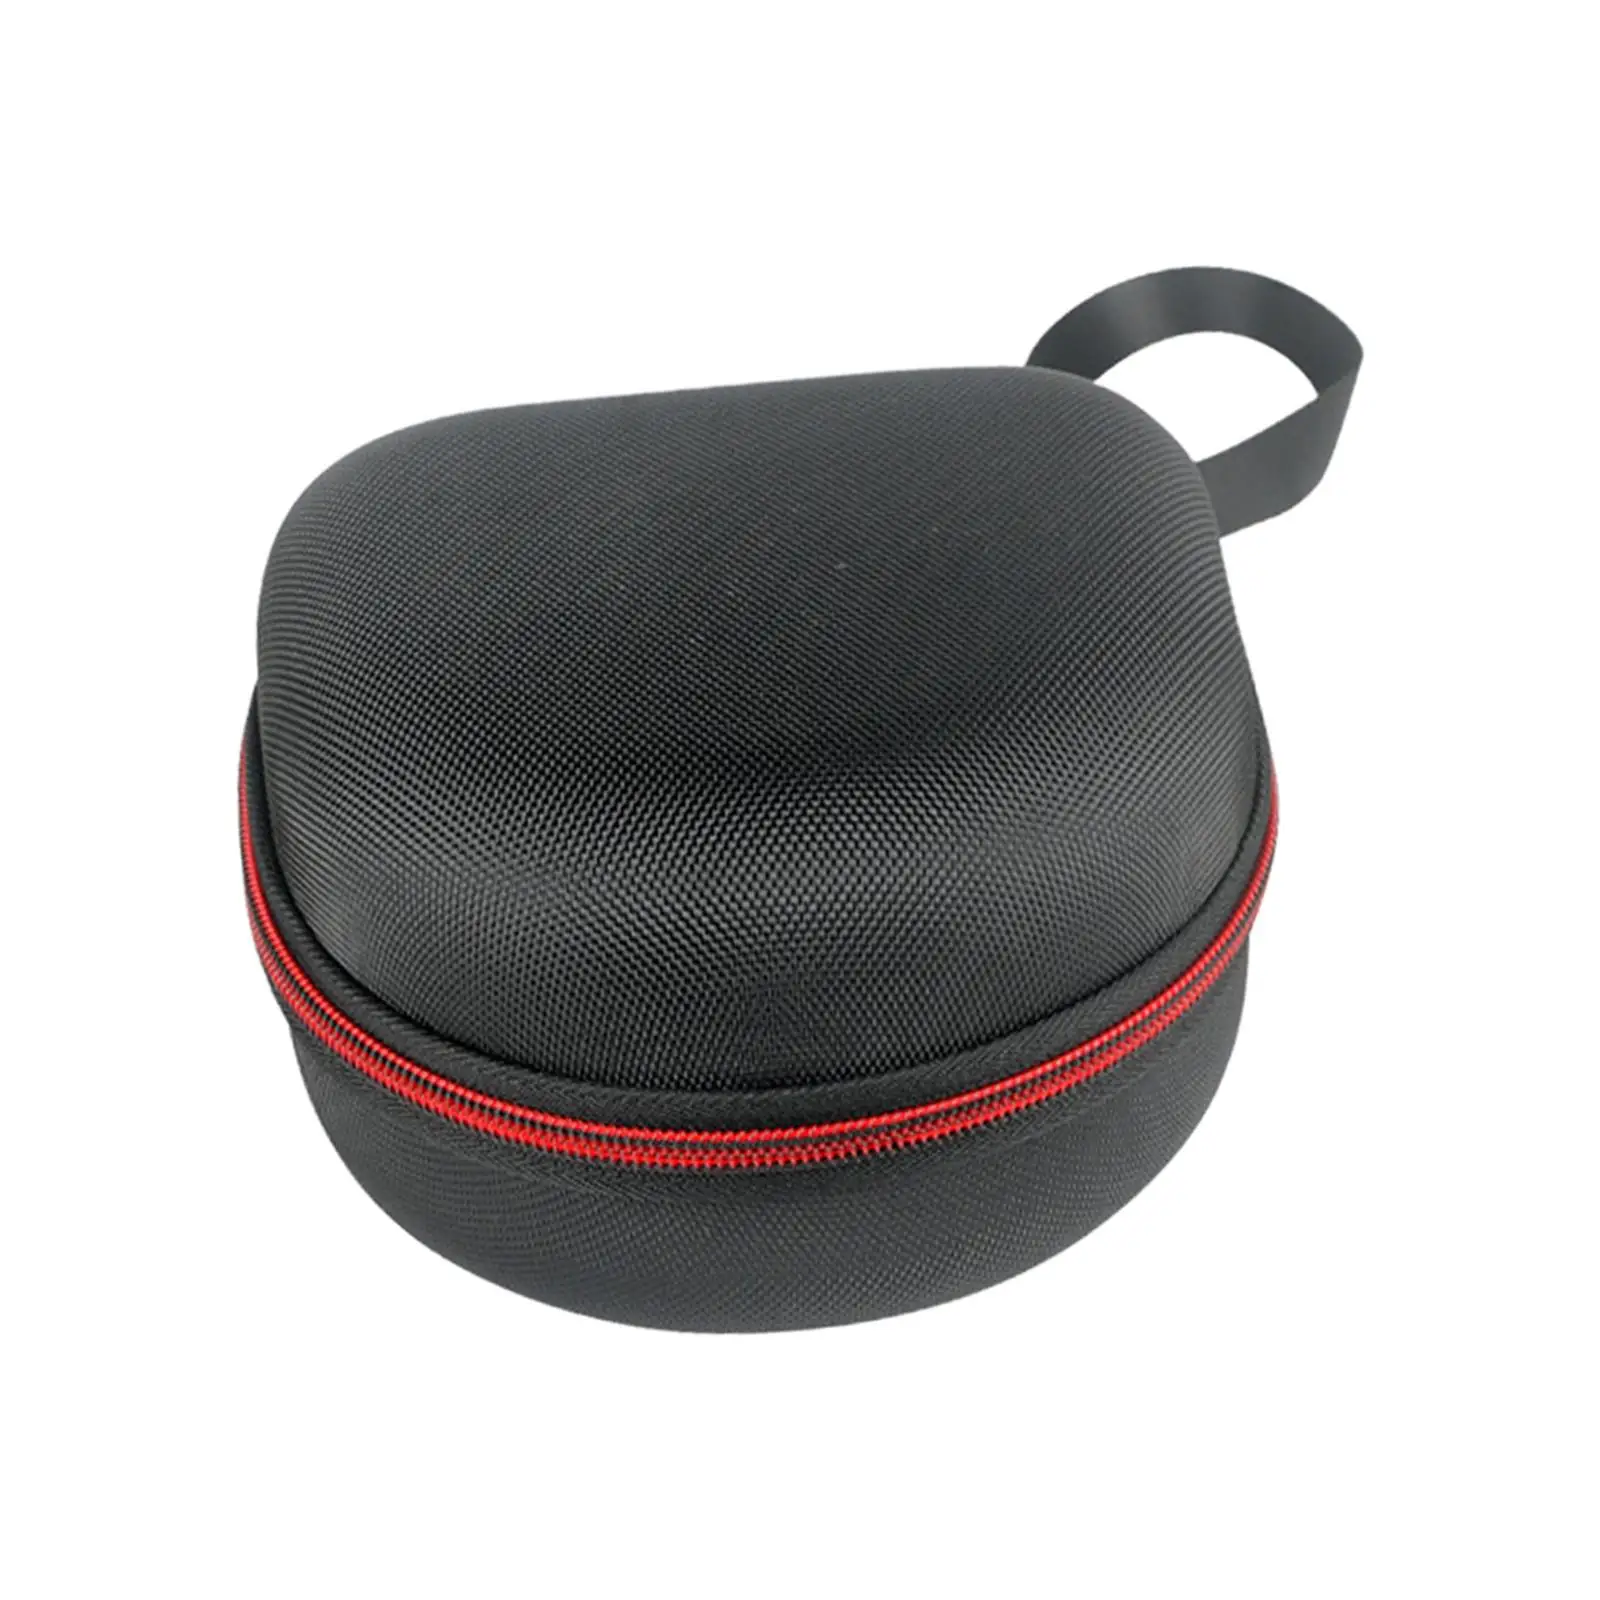 Fishing Reel Case Pouch Thickened Storage Case Baitcasting Reel Case for Drum Raft Baitcasting Reel Accessories